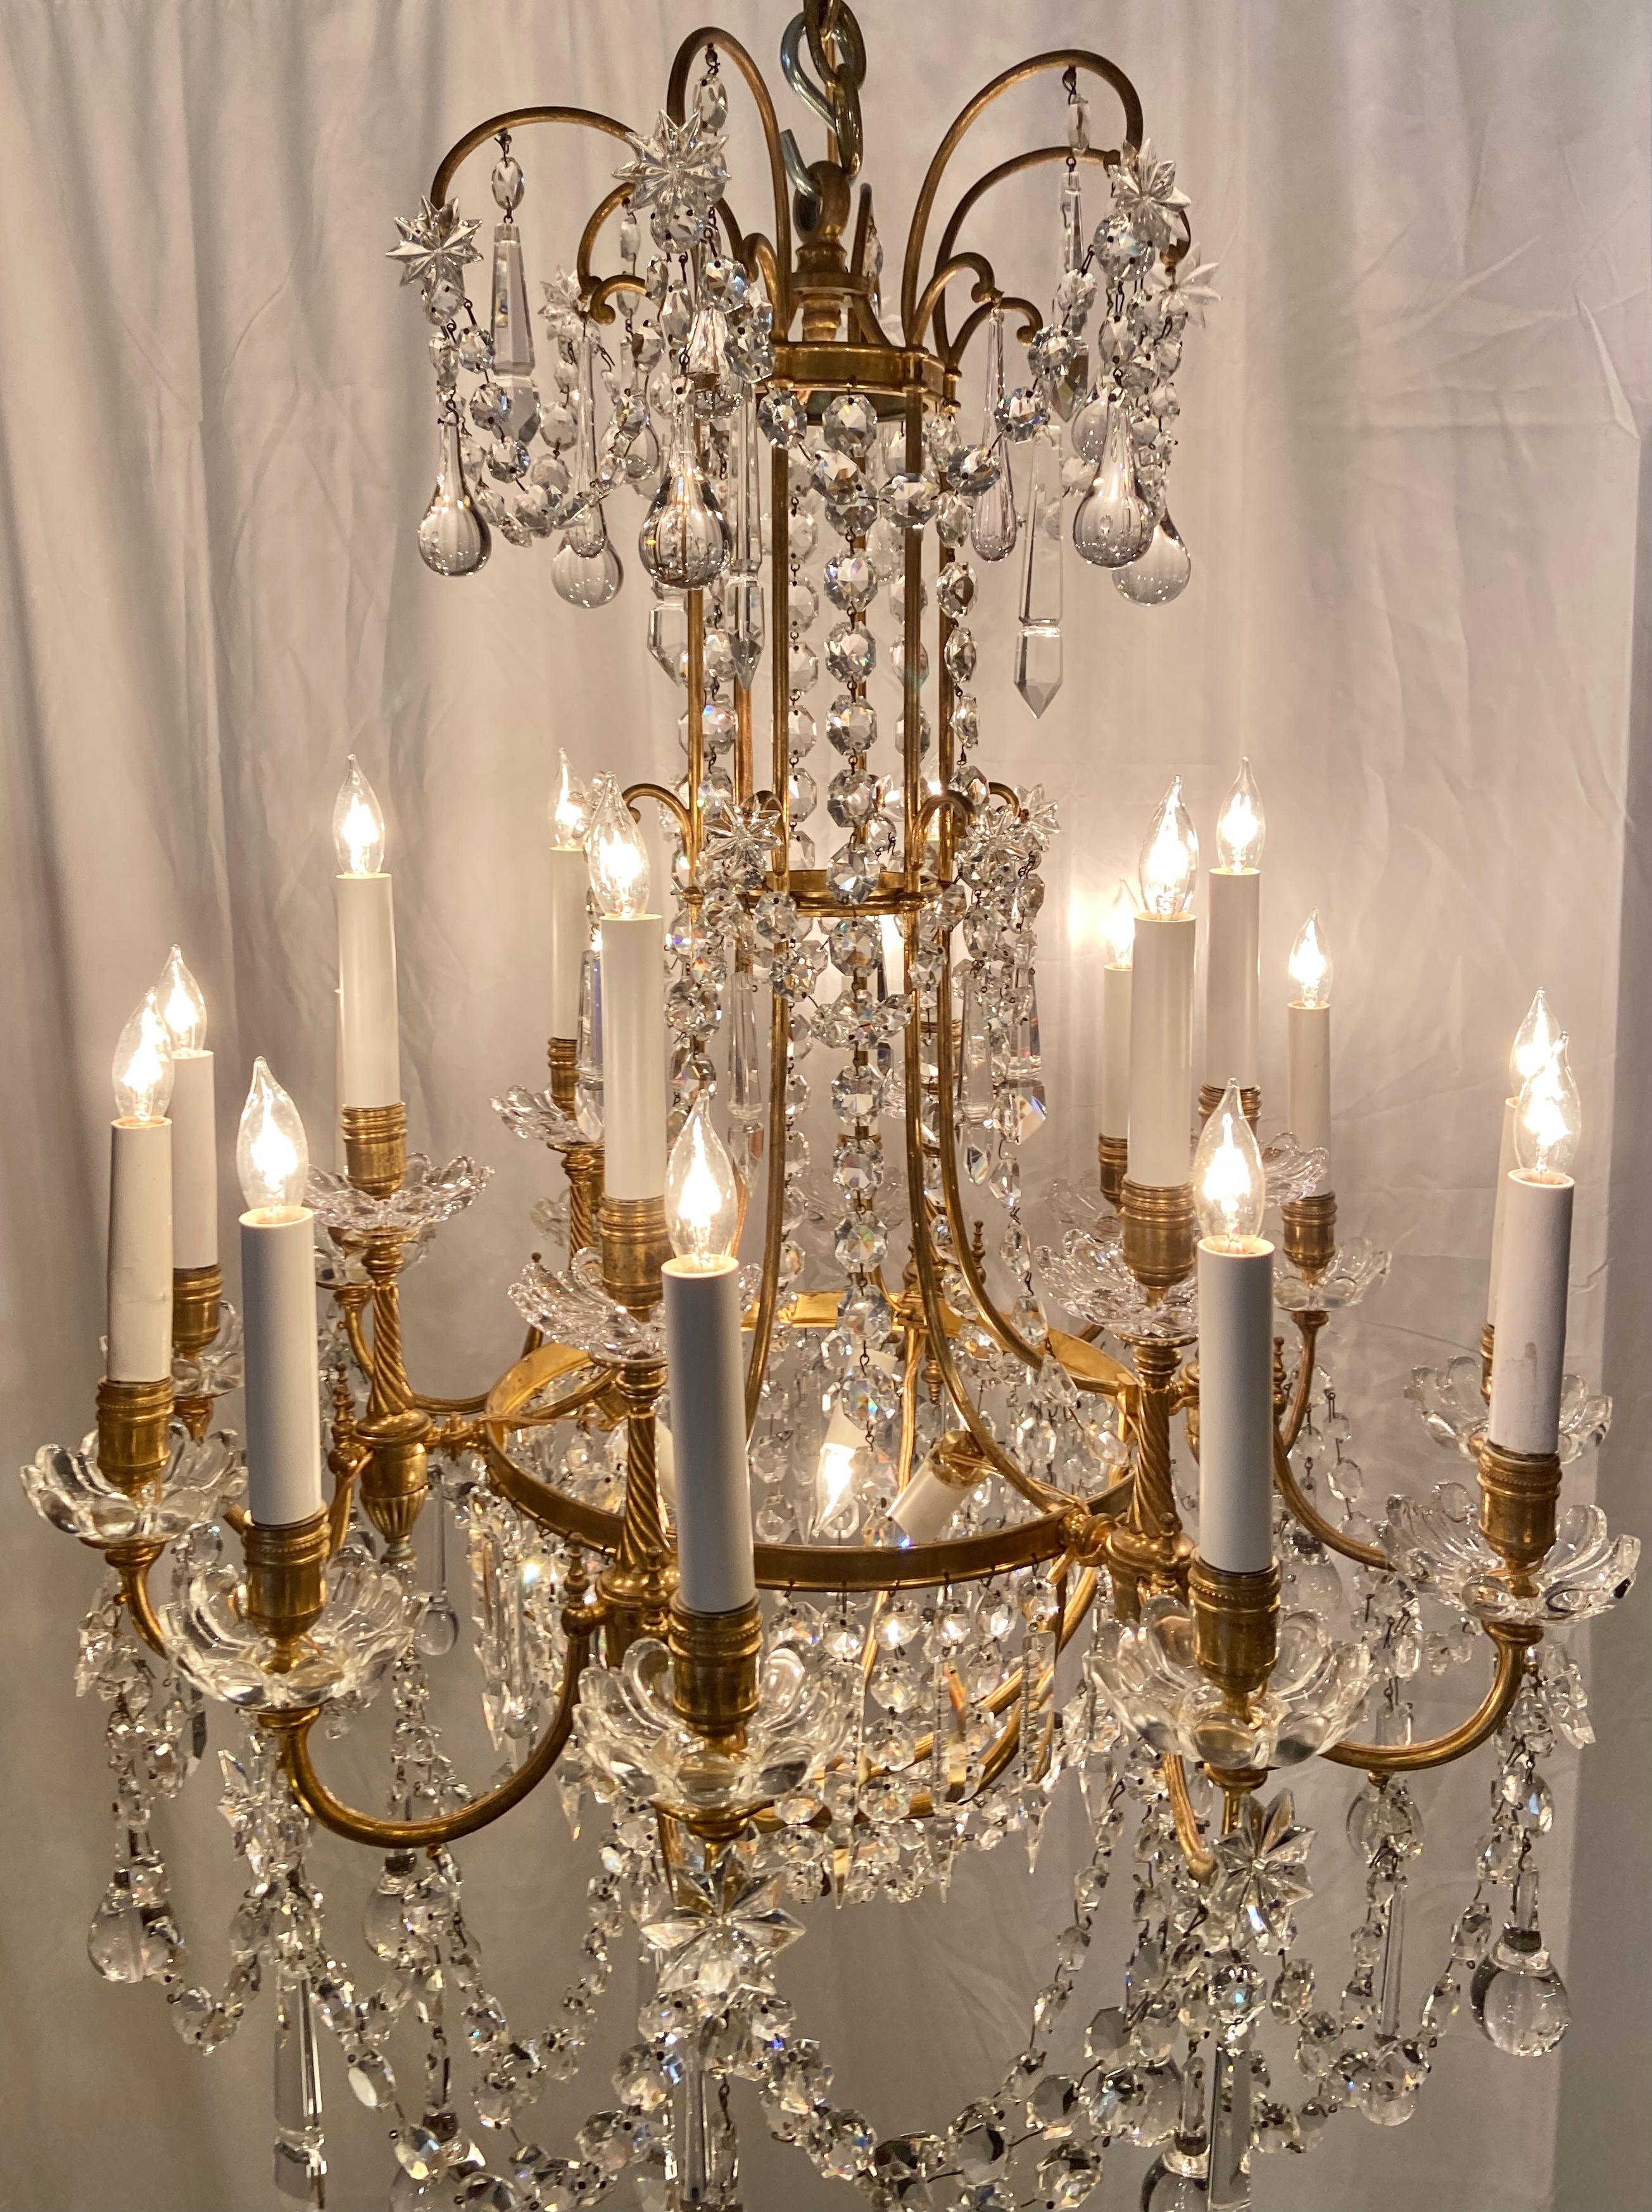 Antique French Baccarat crystal & gold bronze 18-Light Chandelier, Circa 1875-1895.